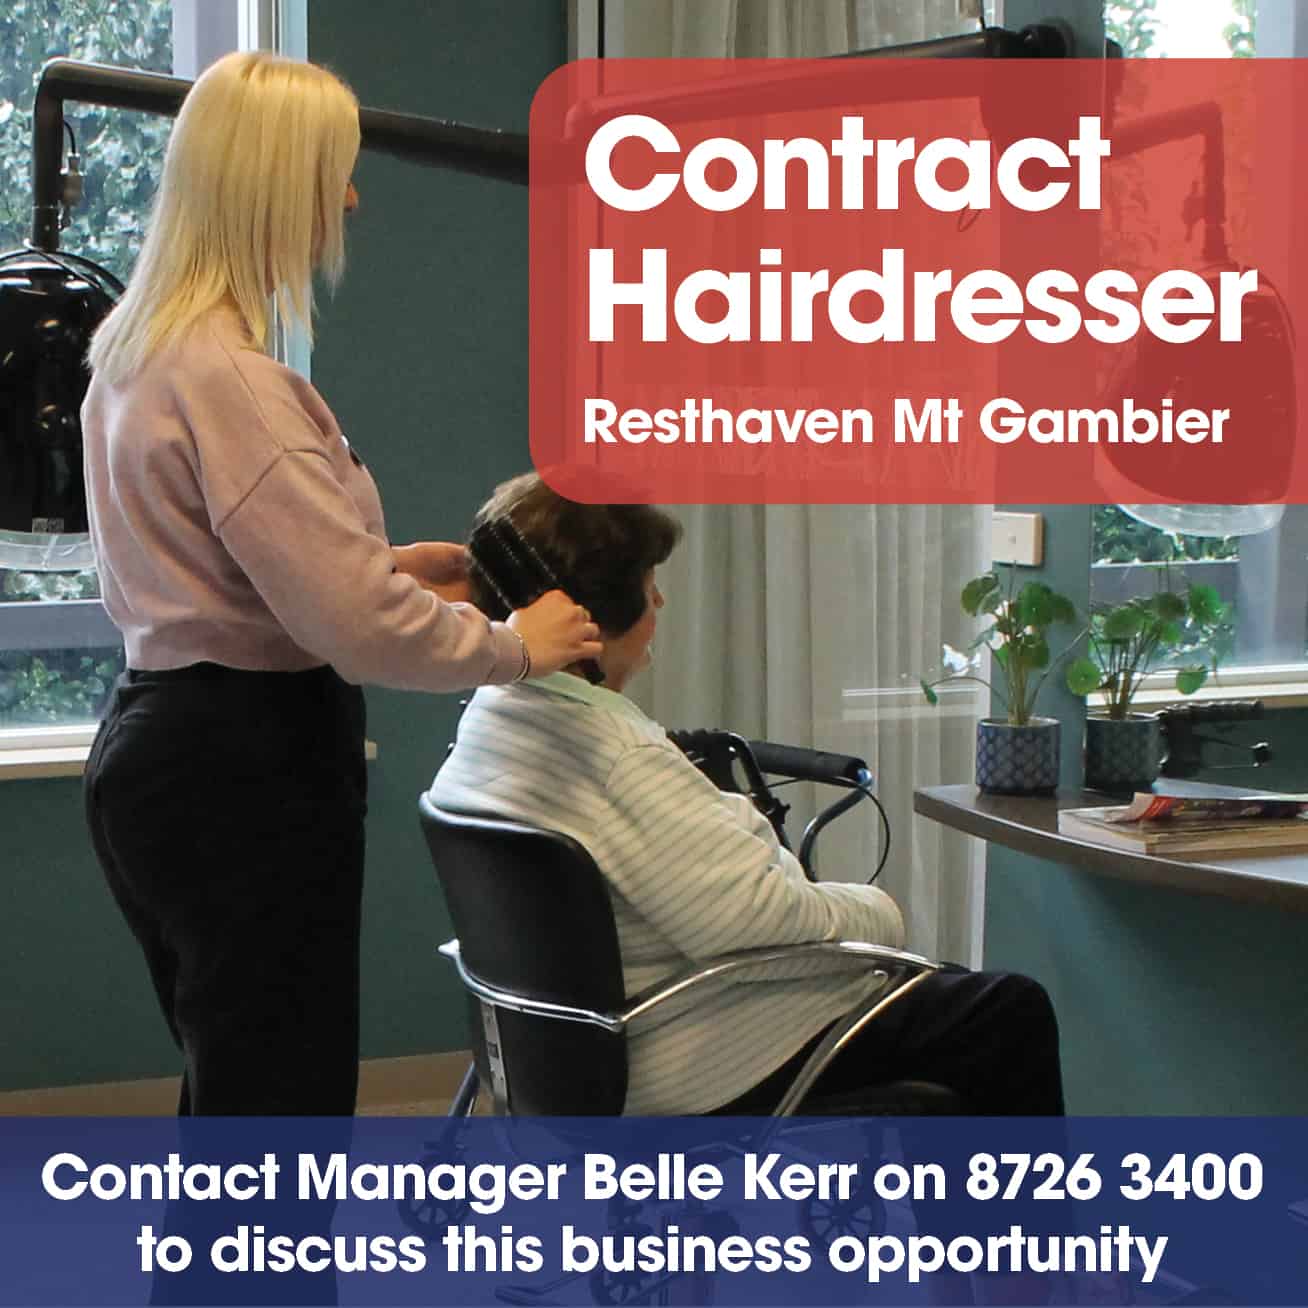 Contract Hairdresser required at Resthaven Mt Gambier